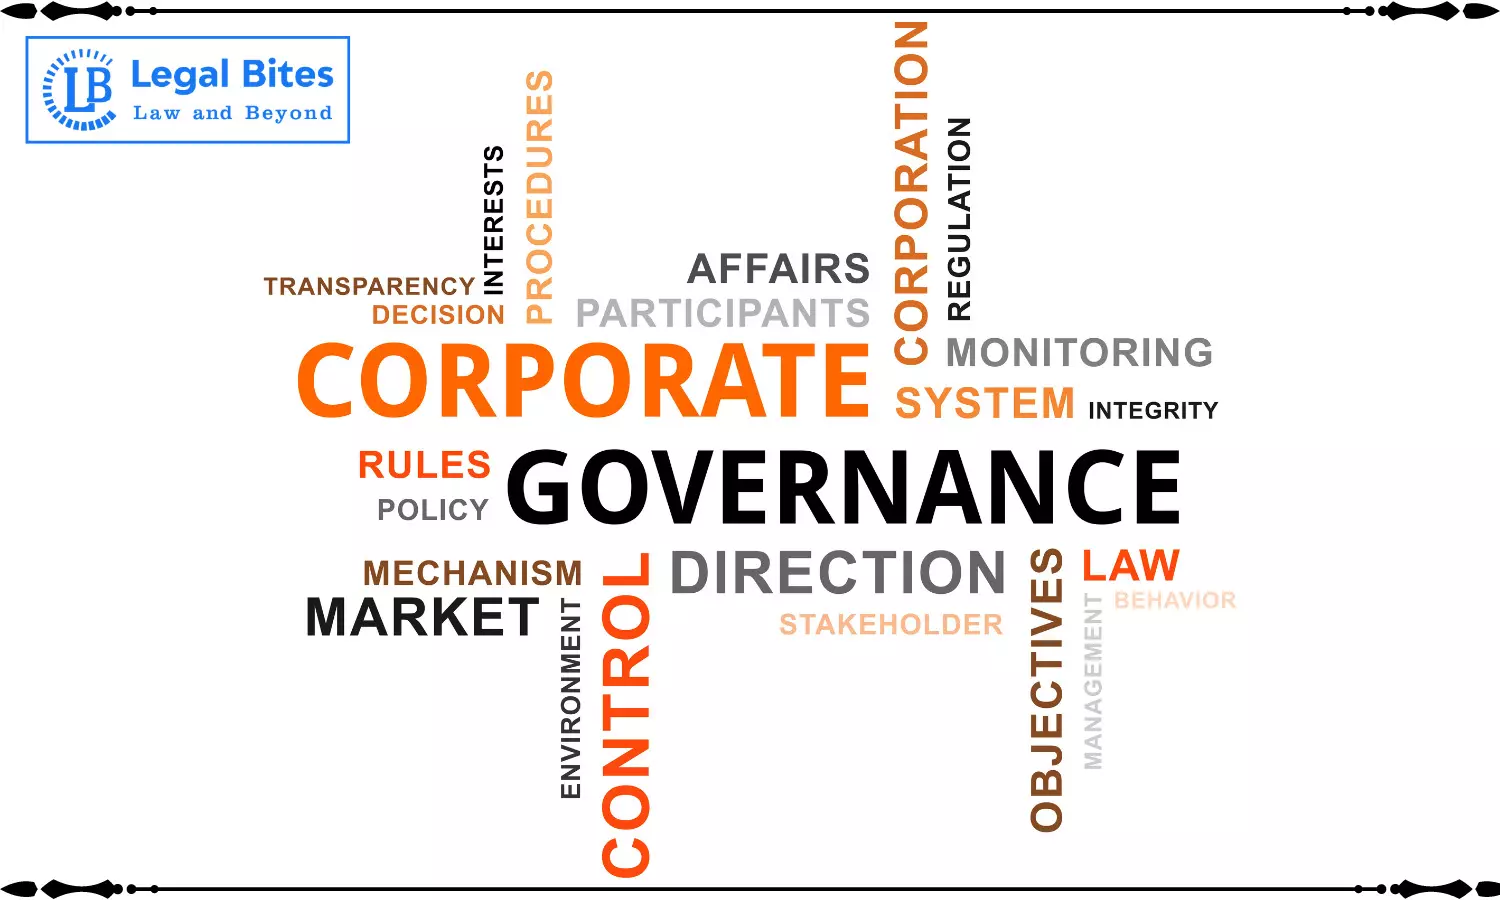 History of Corporate Governance